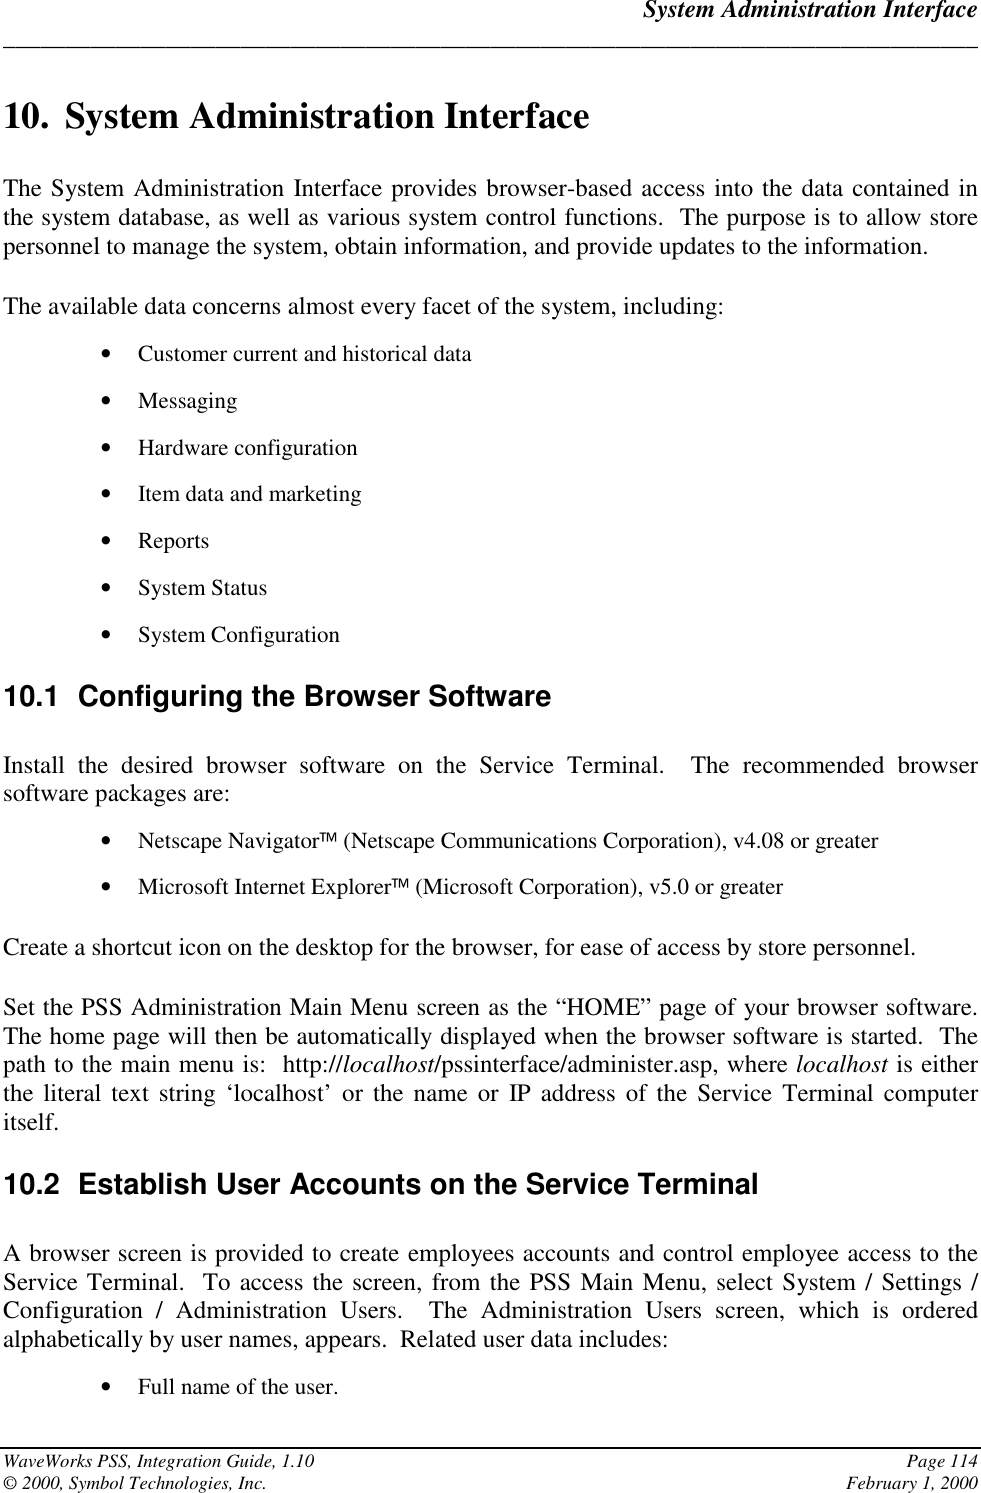 System Administration Interface______________________________________________________________________________WaveWorks PSS, Integration Guide, 1.10 Page 114© 2000, Symbol Technologies, Inc. February 1, 200010. System Administration InterfaceThe System Administration Interface provides browser-based access into the data contained inthe system database, as well as various system control functions.  The purpose is to allow storepersonnel to manage the system, obtain information, and provide updates to the information.The available data concerns almost every facet of the system, including:• Customer current and historical data• Messaging• Hardware configuration• Item data and marketing• Reports• System Status• System Configuration10.1  Configuring the Browser SoftwareInstall the desired browser software on the Service Terminal.  The recommended browsersoftware packages are:• Netscape Navigator (Netscape Communications Corporation), v4.08 or greater• Microsoft Internet Explorer (Microsoft Corporation), v5.0 or greaterCreate a shortcut icon on the desktop for the browser, for ease of access by store personnel.Set the PSS Administration Main Menu screen as the “HOME” page of your browser software.The home page will then be automatically displayed when the browser software is started.  Thepath to the main menu is:  http://localhost/pssinterface/administer.asp, where localhost is eitherthe literal text string ‘localhost’ or the name or IP address of the Service Terminal computeritself.10.2  Establish User Accounts on the Service TerminalA browser screen is provided to create employees accounts and control employee access to theService Terminal.  To access the screen, from the PSS Main Menu, select System / Settings /Configuration / Administration Users.  The Administration Users screen, which is orderedalphabetically by user names, appears.  Related user data includes:• Full name of the user.